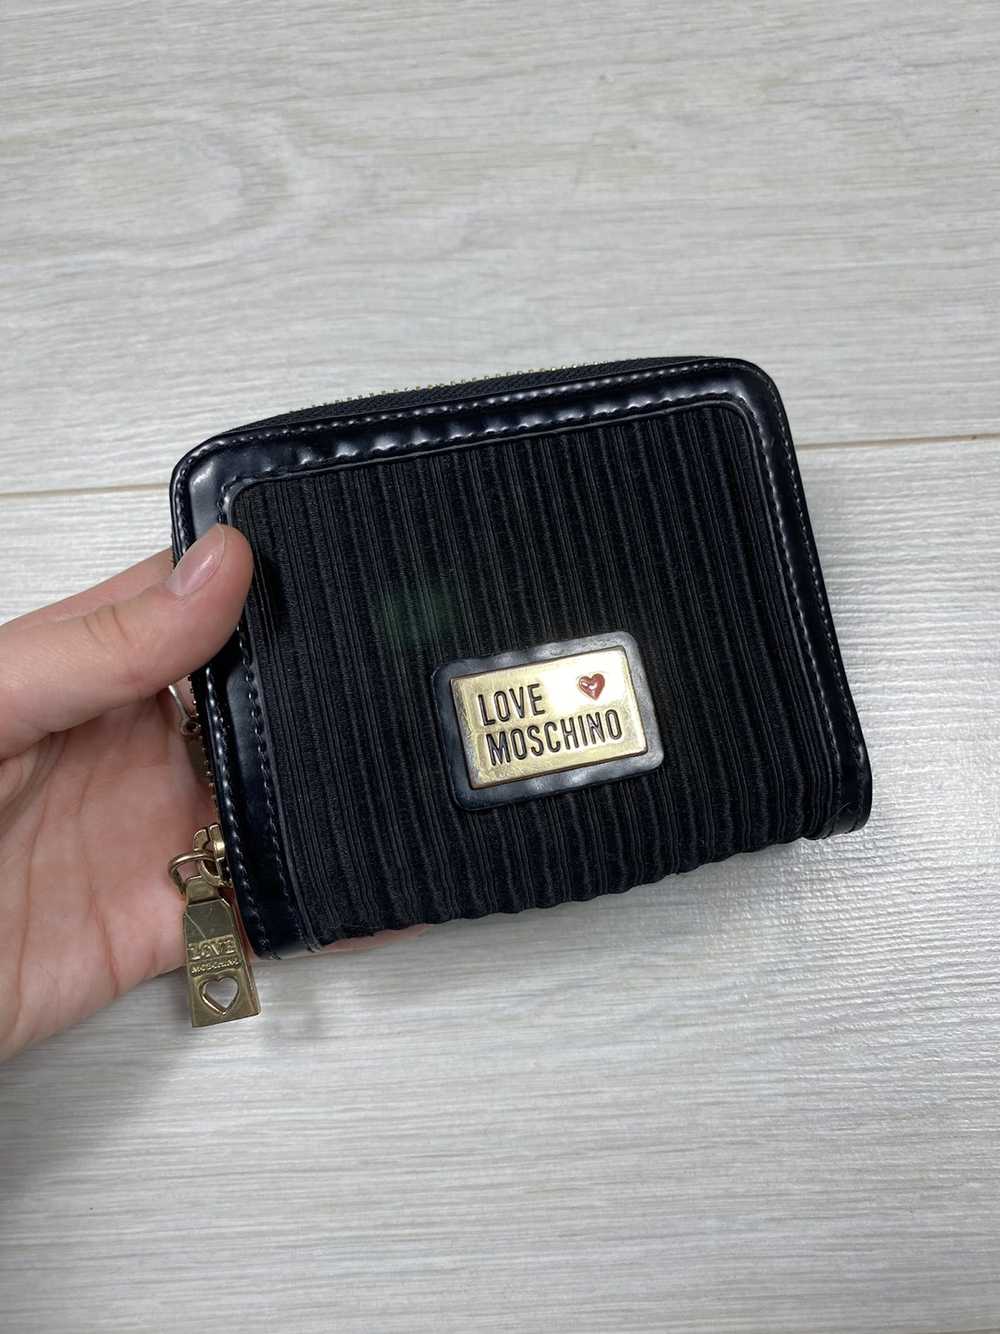 Love Moschino × Vintage Love Moschino wallet purse - image 1